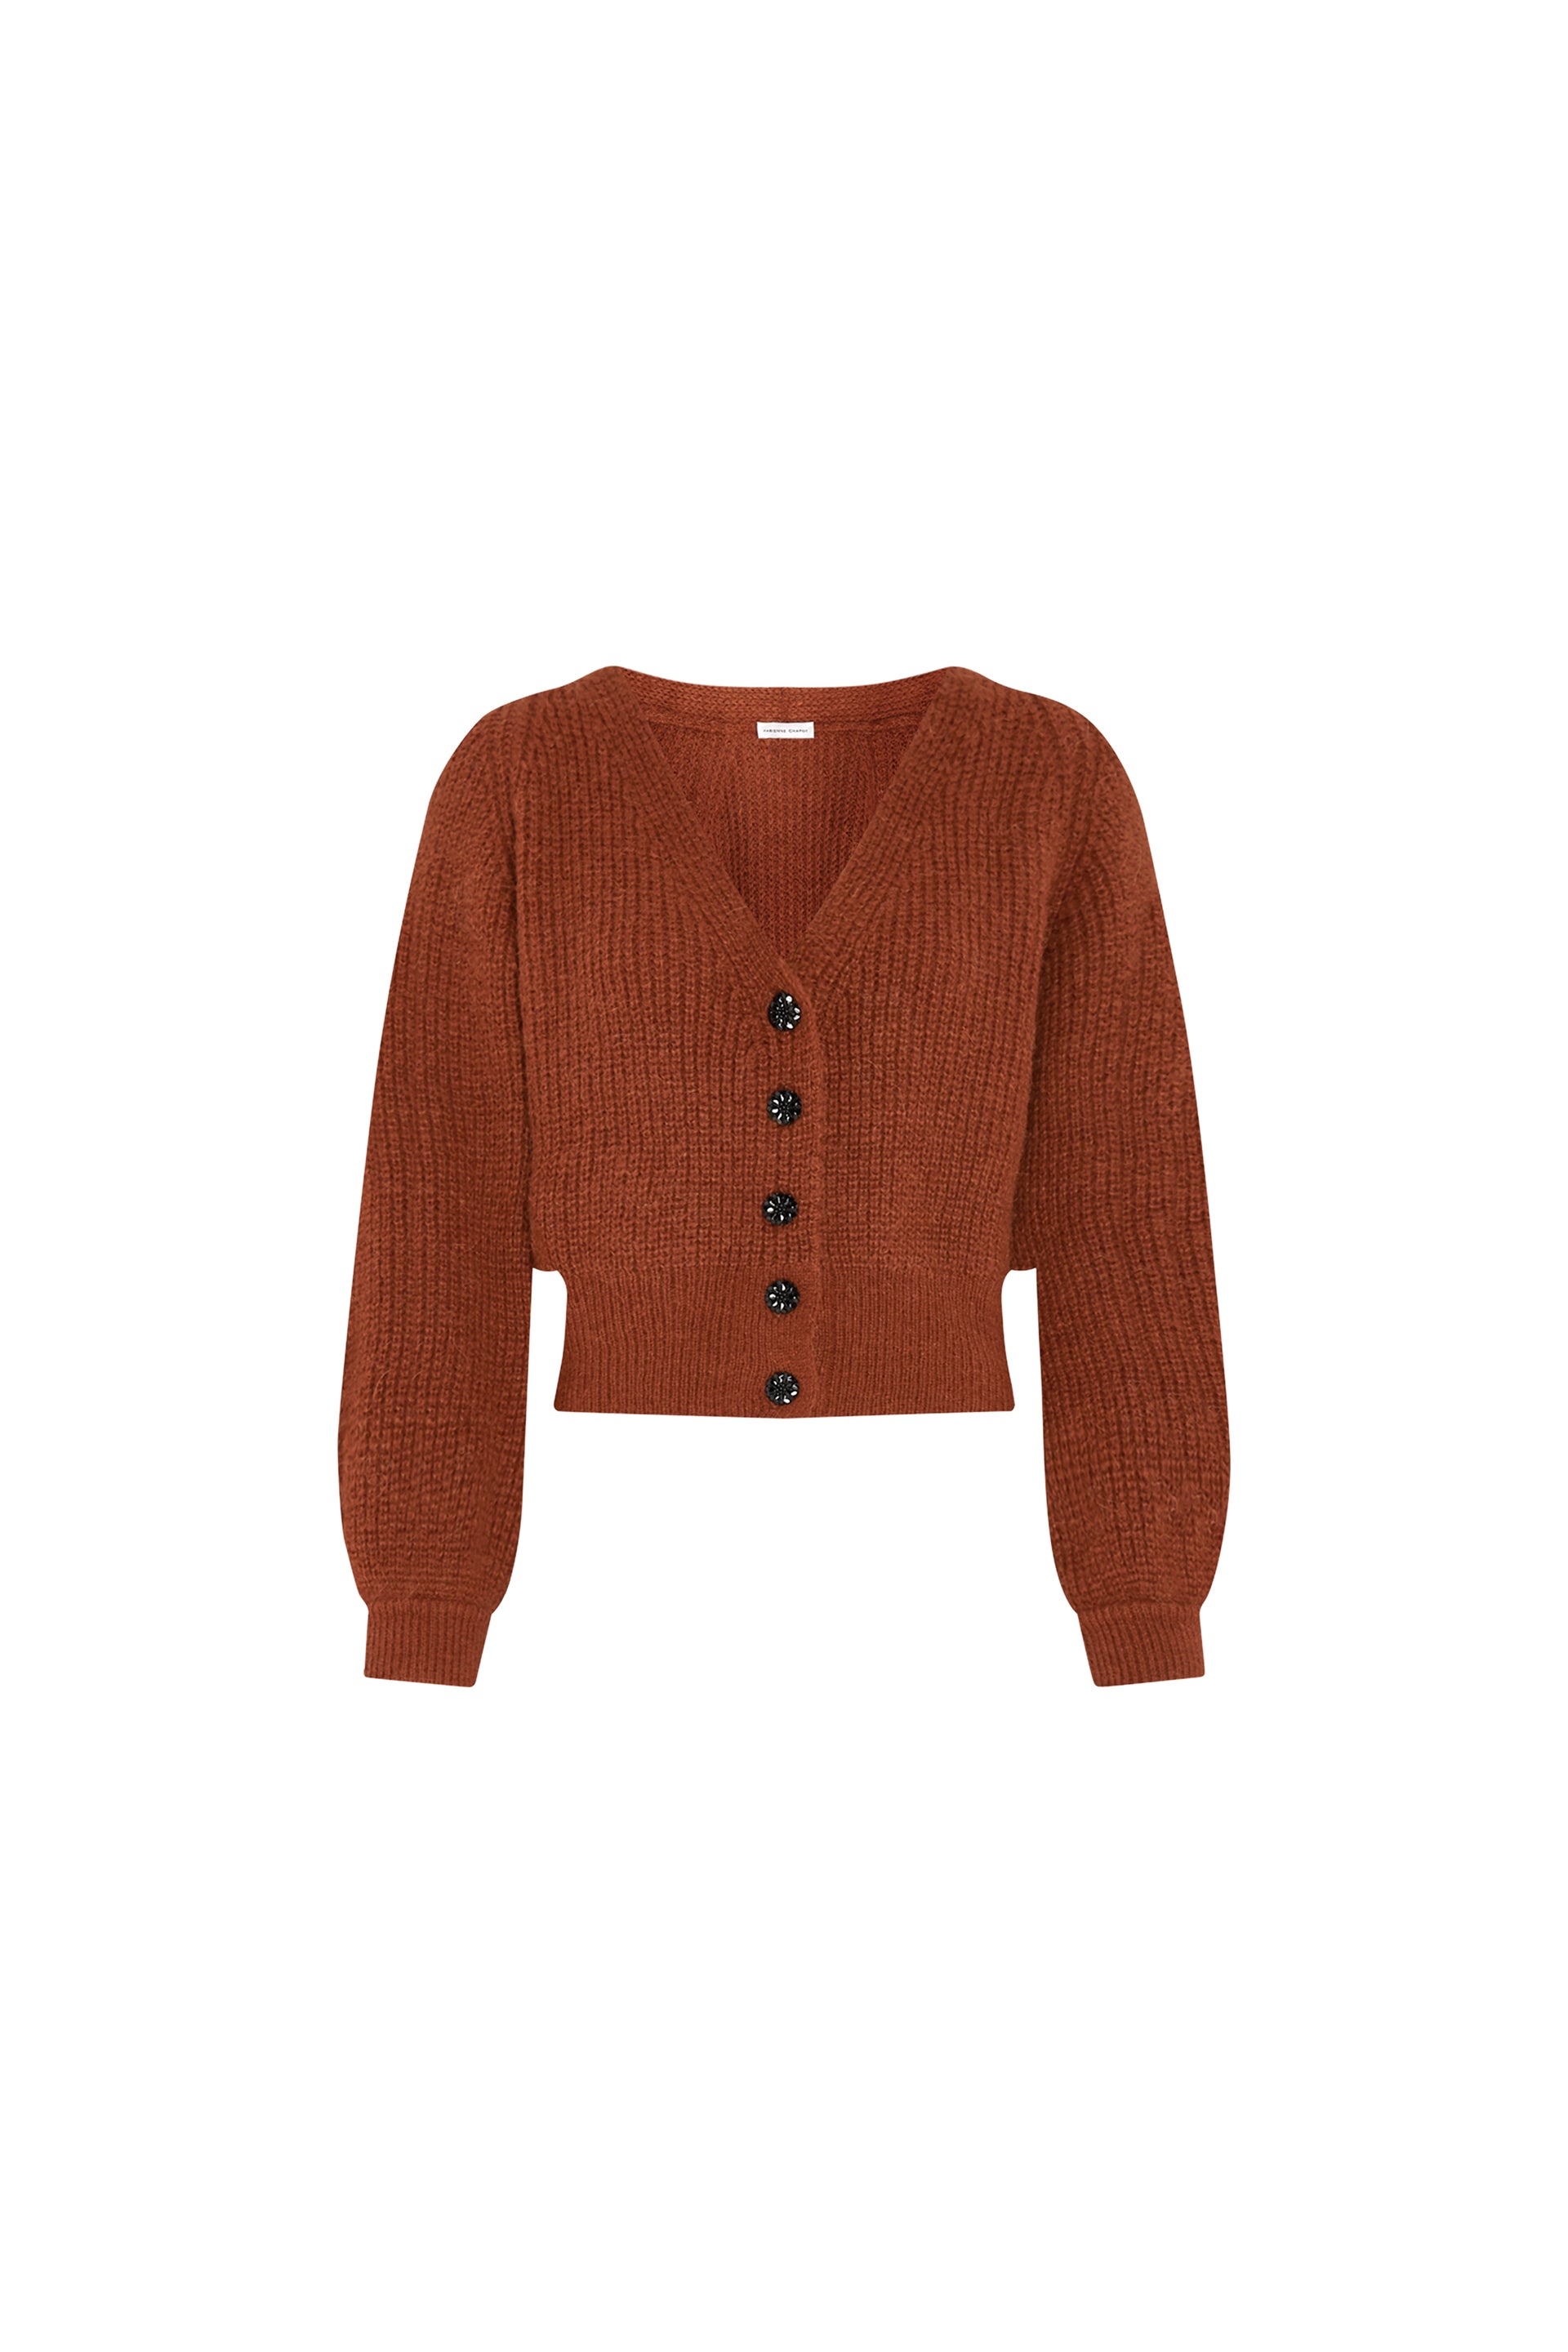 Brown knitted cardigan with V neck